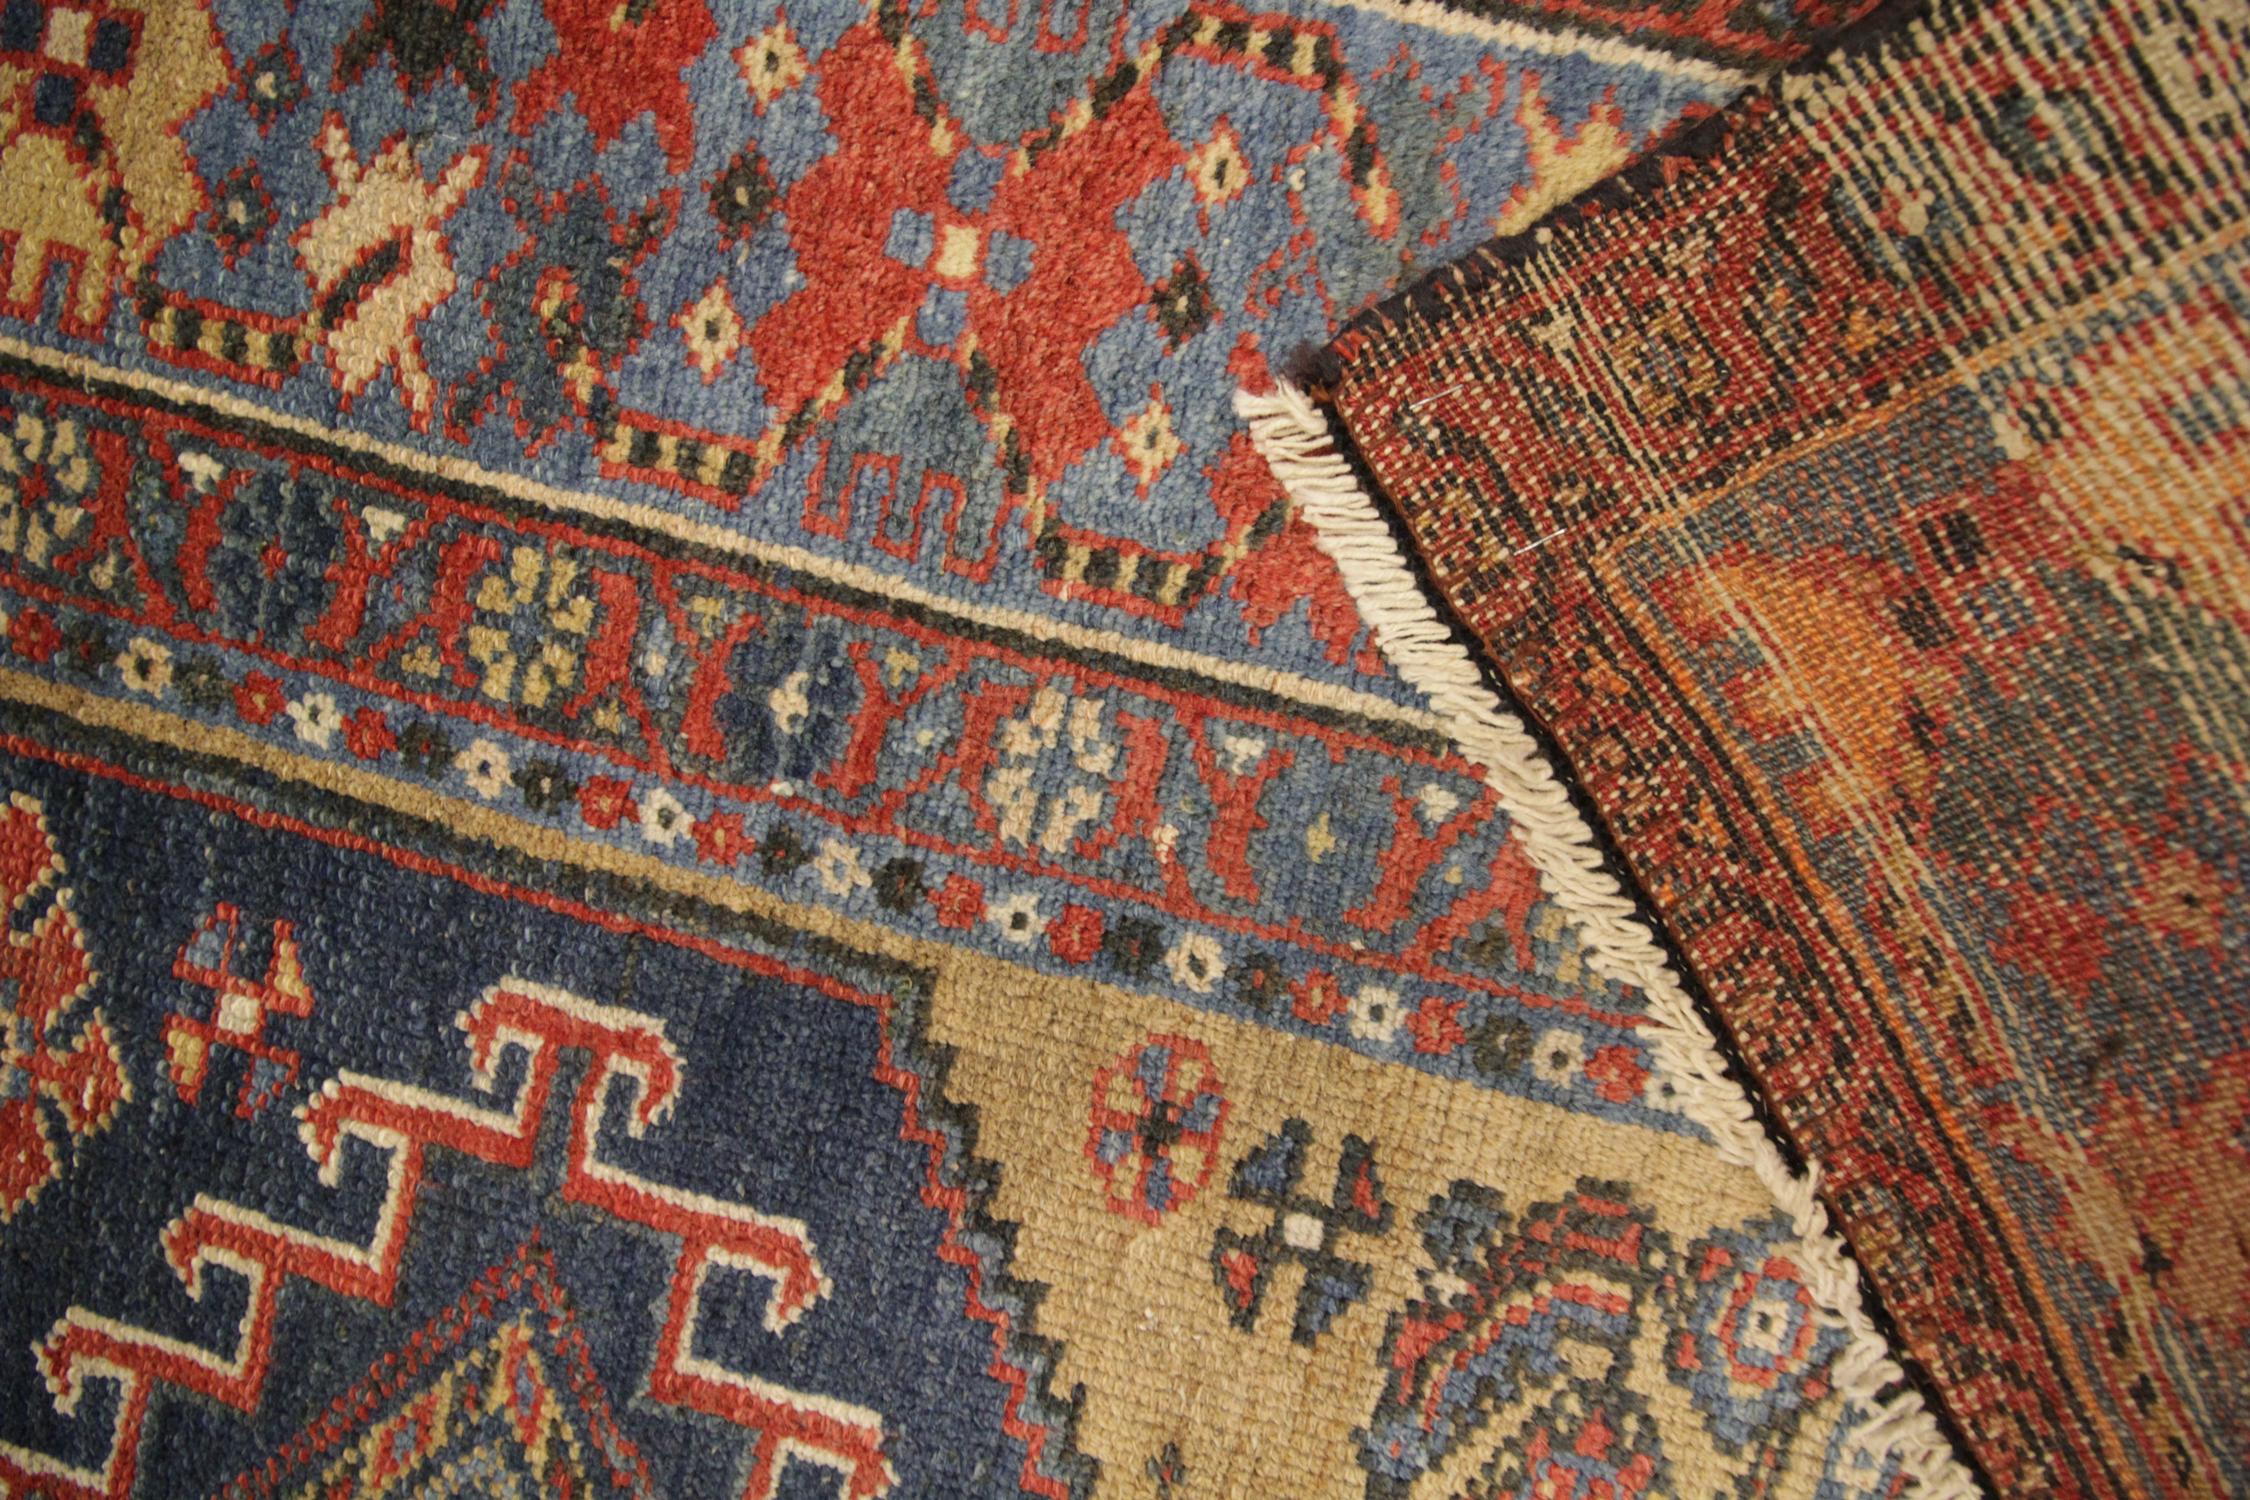 20th Century High-Quality Antique Caucasian Living Room Rug Multicolored Tribal Carpet Rug For Sale